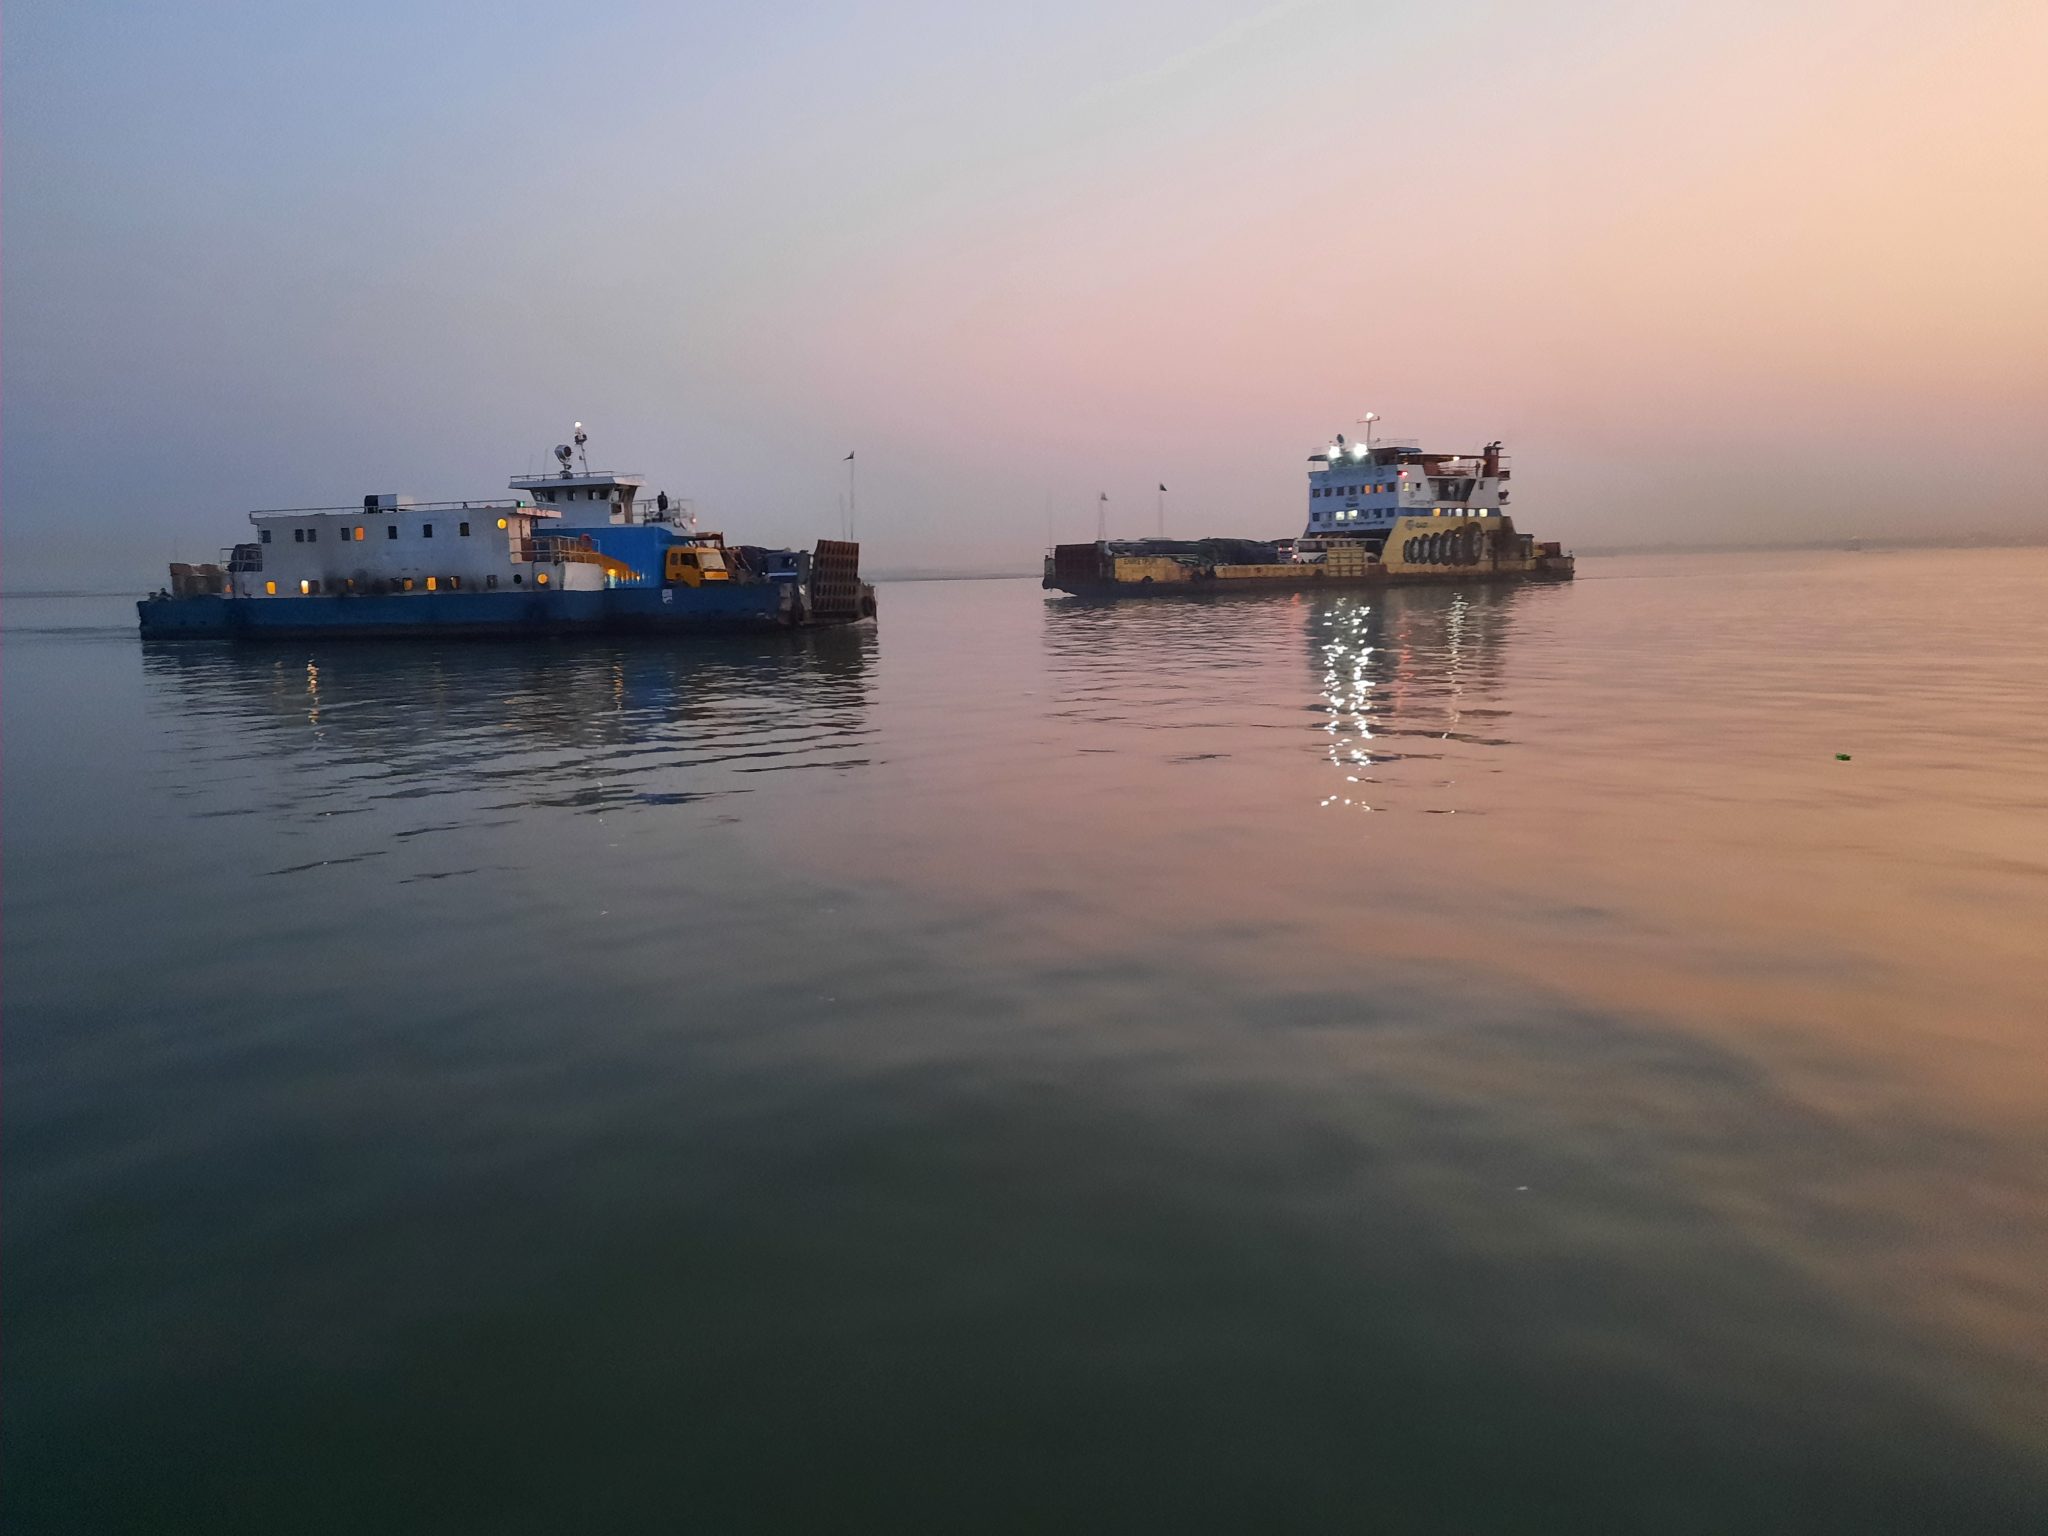 Two ferry crosses the River of Padma.